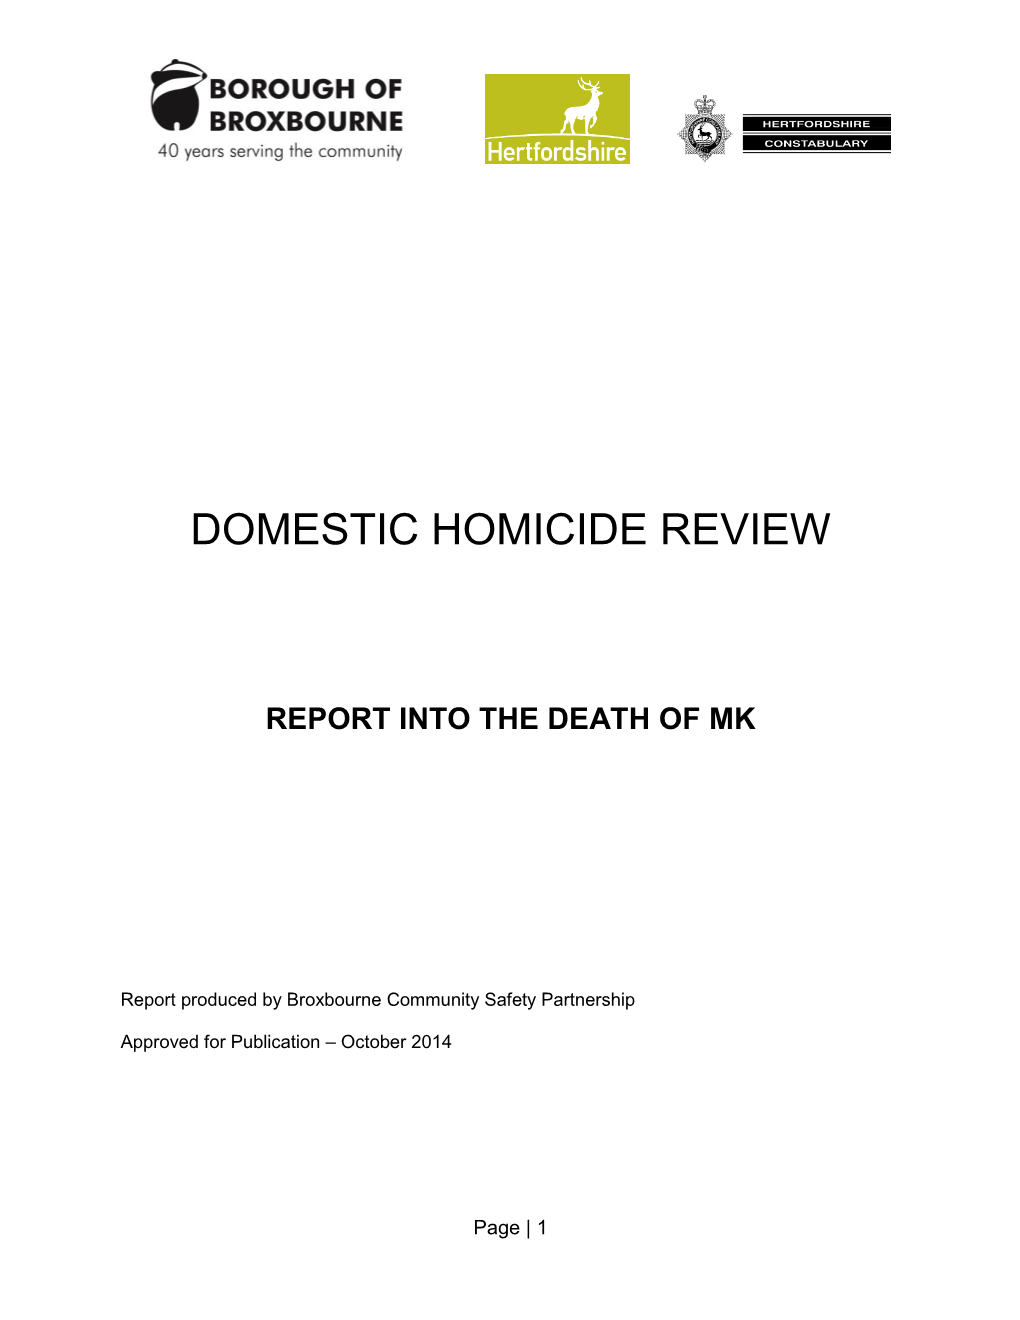 Domestic Homicide Review